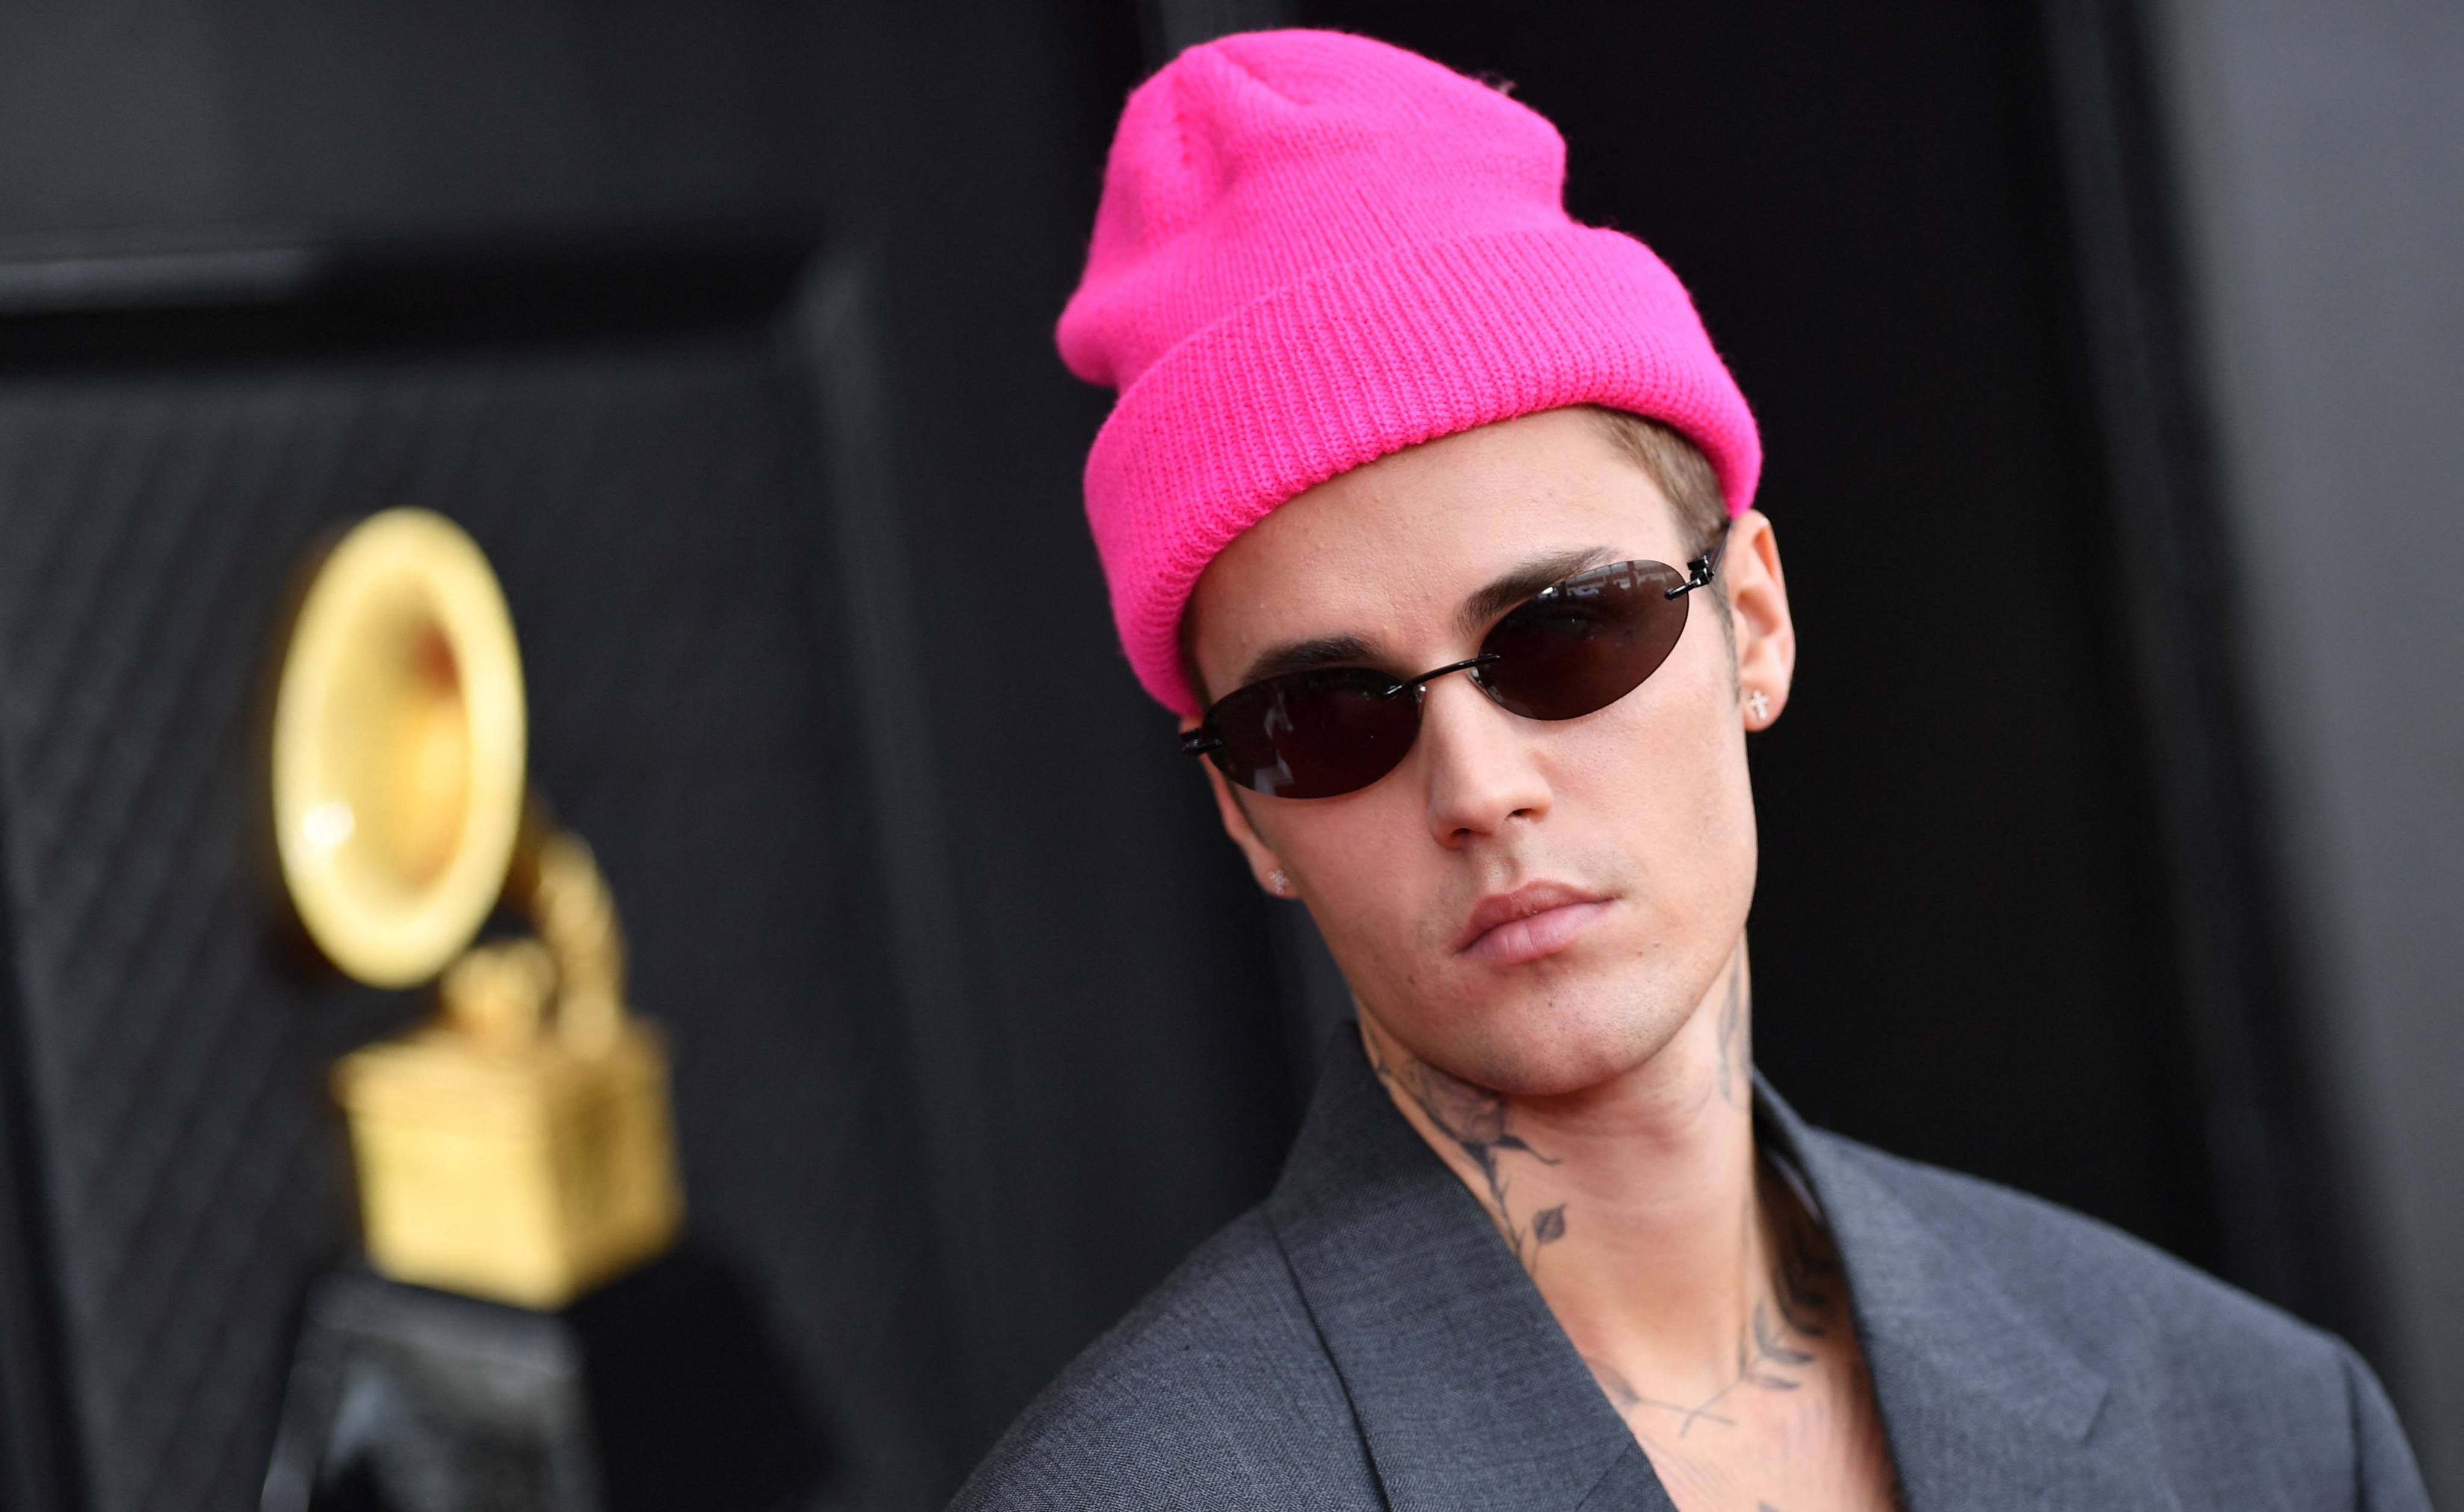 Justin Bieber says the condition is ‘pretty serious’. Photo: AFP 